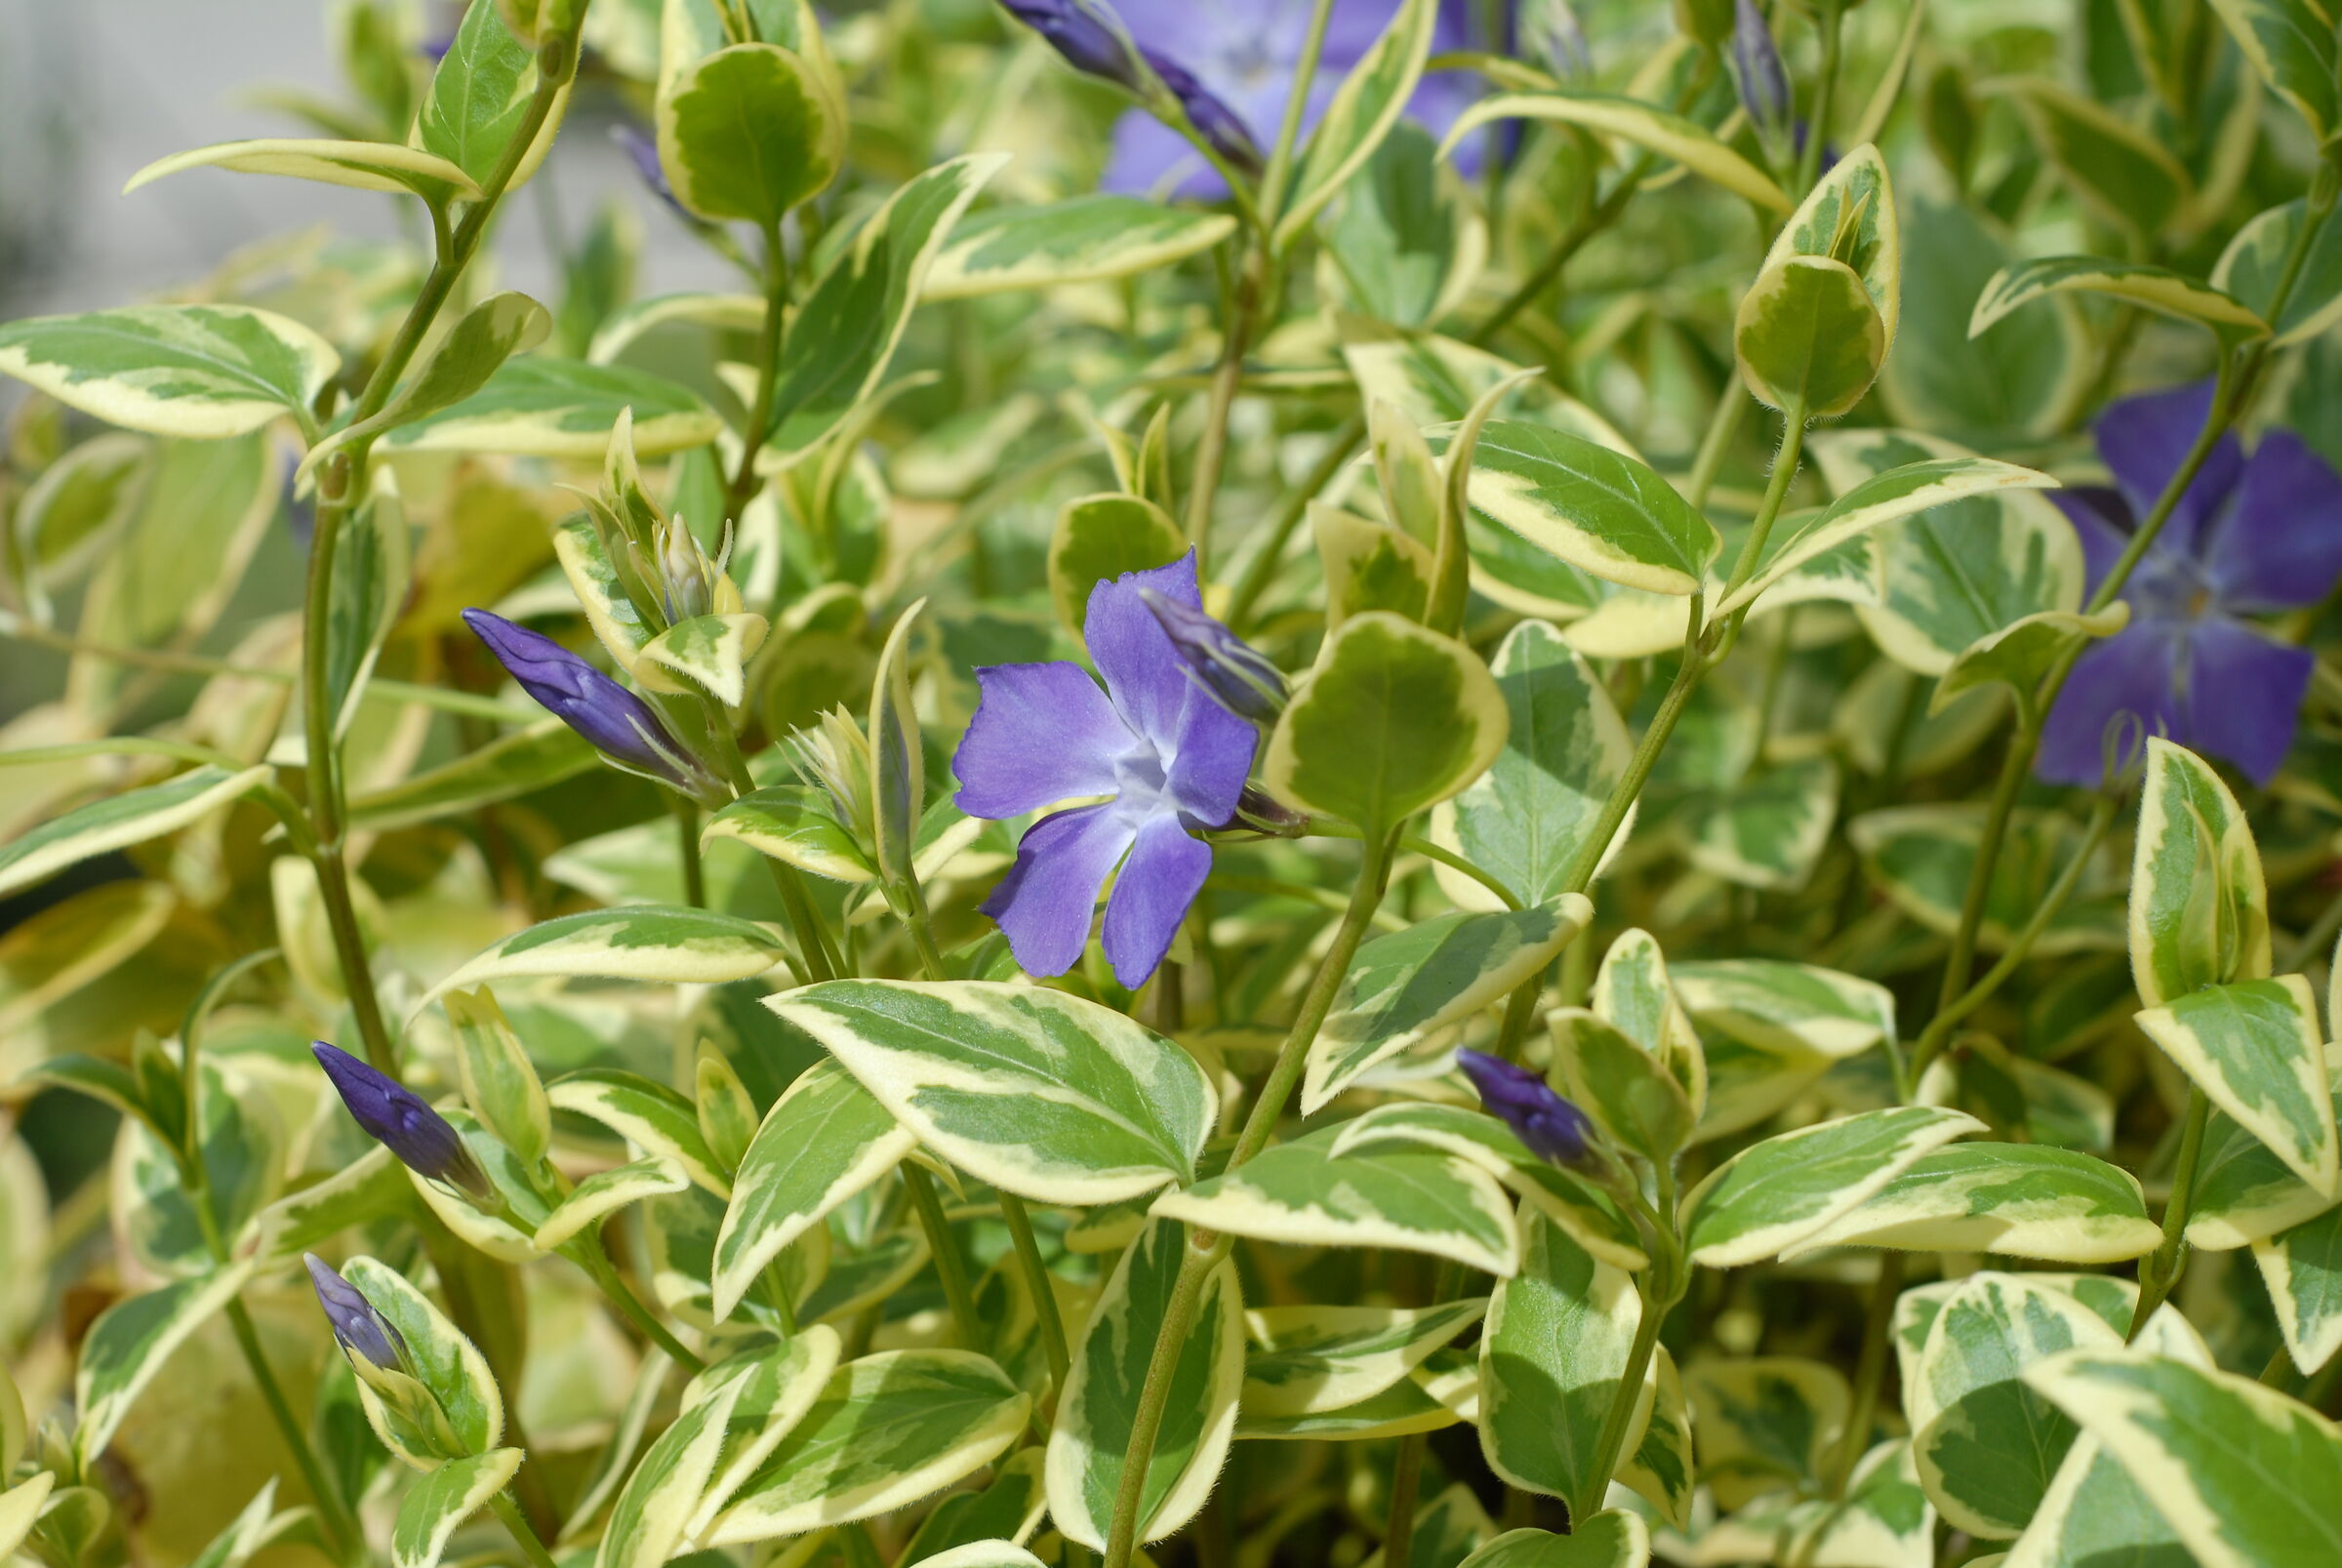 The periwinkle of the balcony...